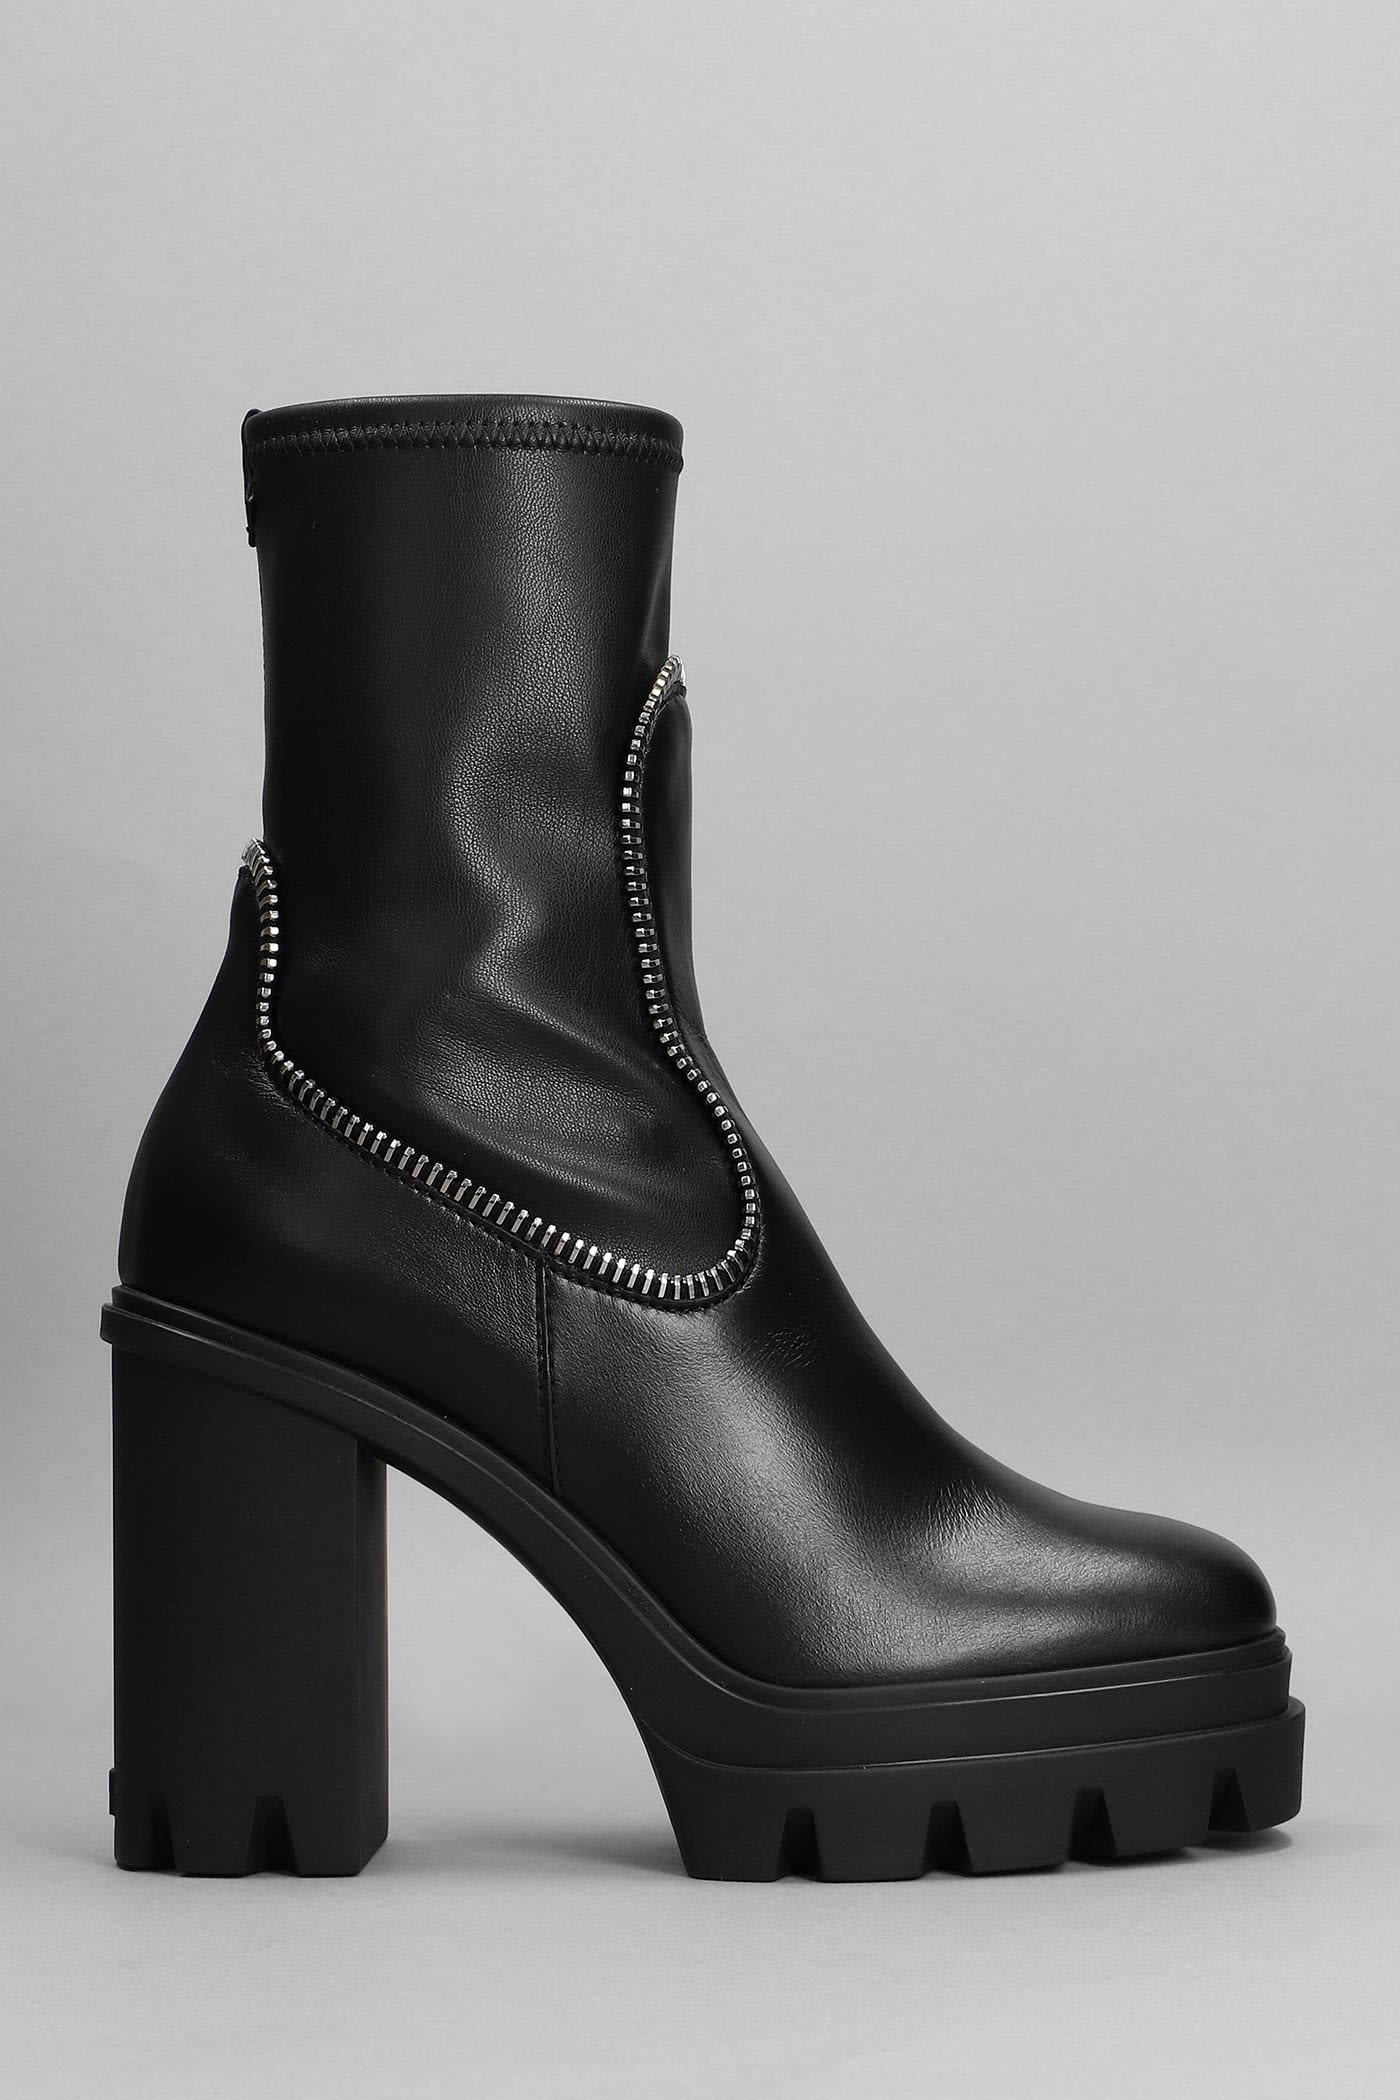 GIUSEPPE ZANOTTI HIGH HEELS ANKLE BOOTS IN BLACK LEATHER